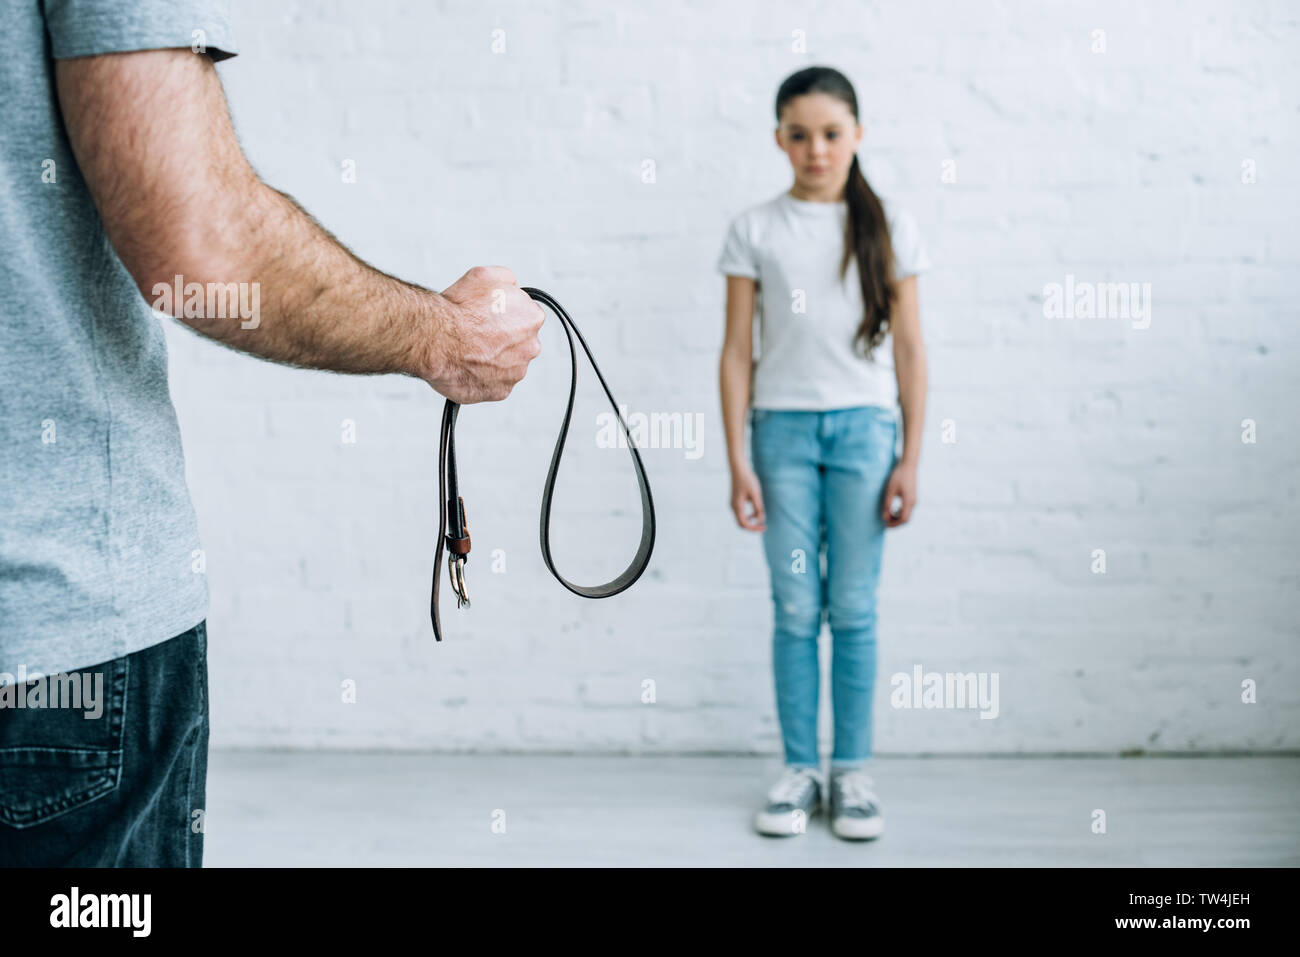 Stepfather punishes daughter image